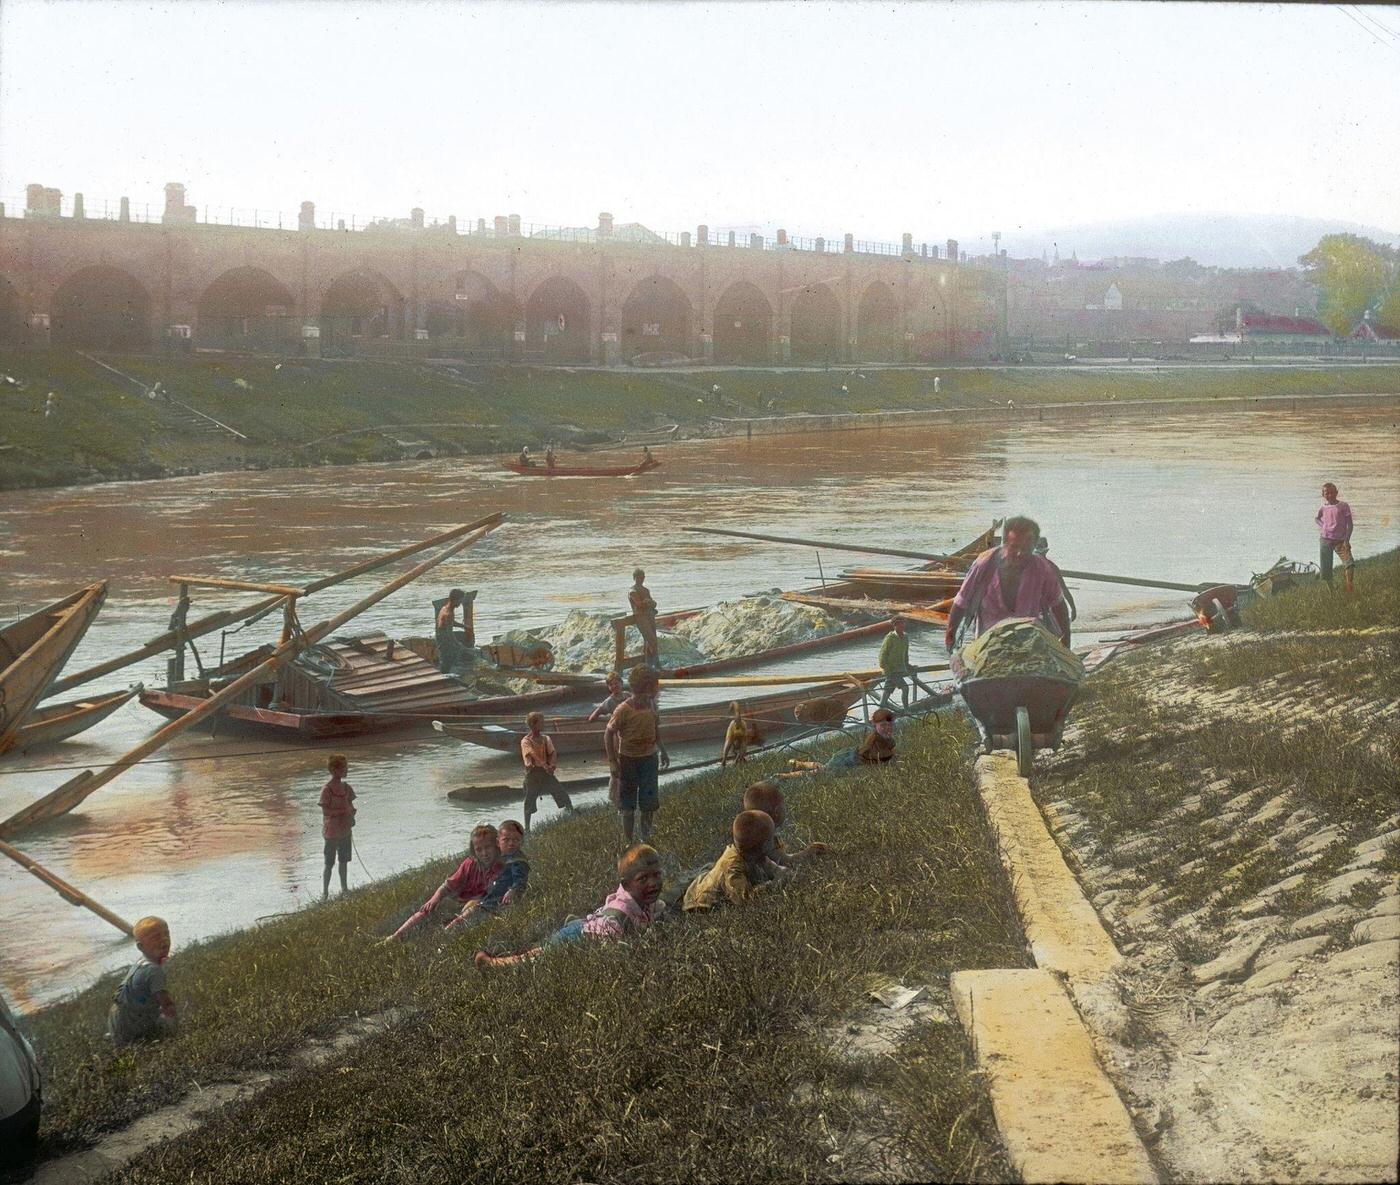 Unloading sand from a barge at the Brigittenauer Laende, with a view of the Viennese Stadtbahn on the opposite bank, 1905.